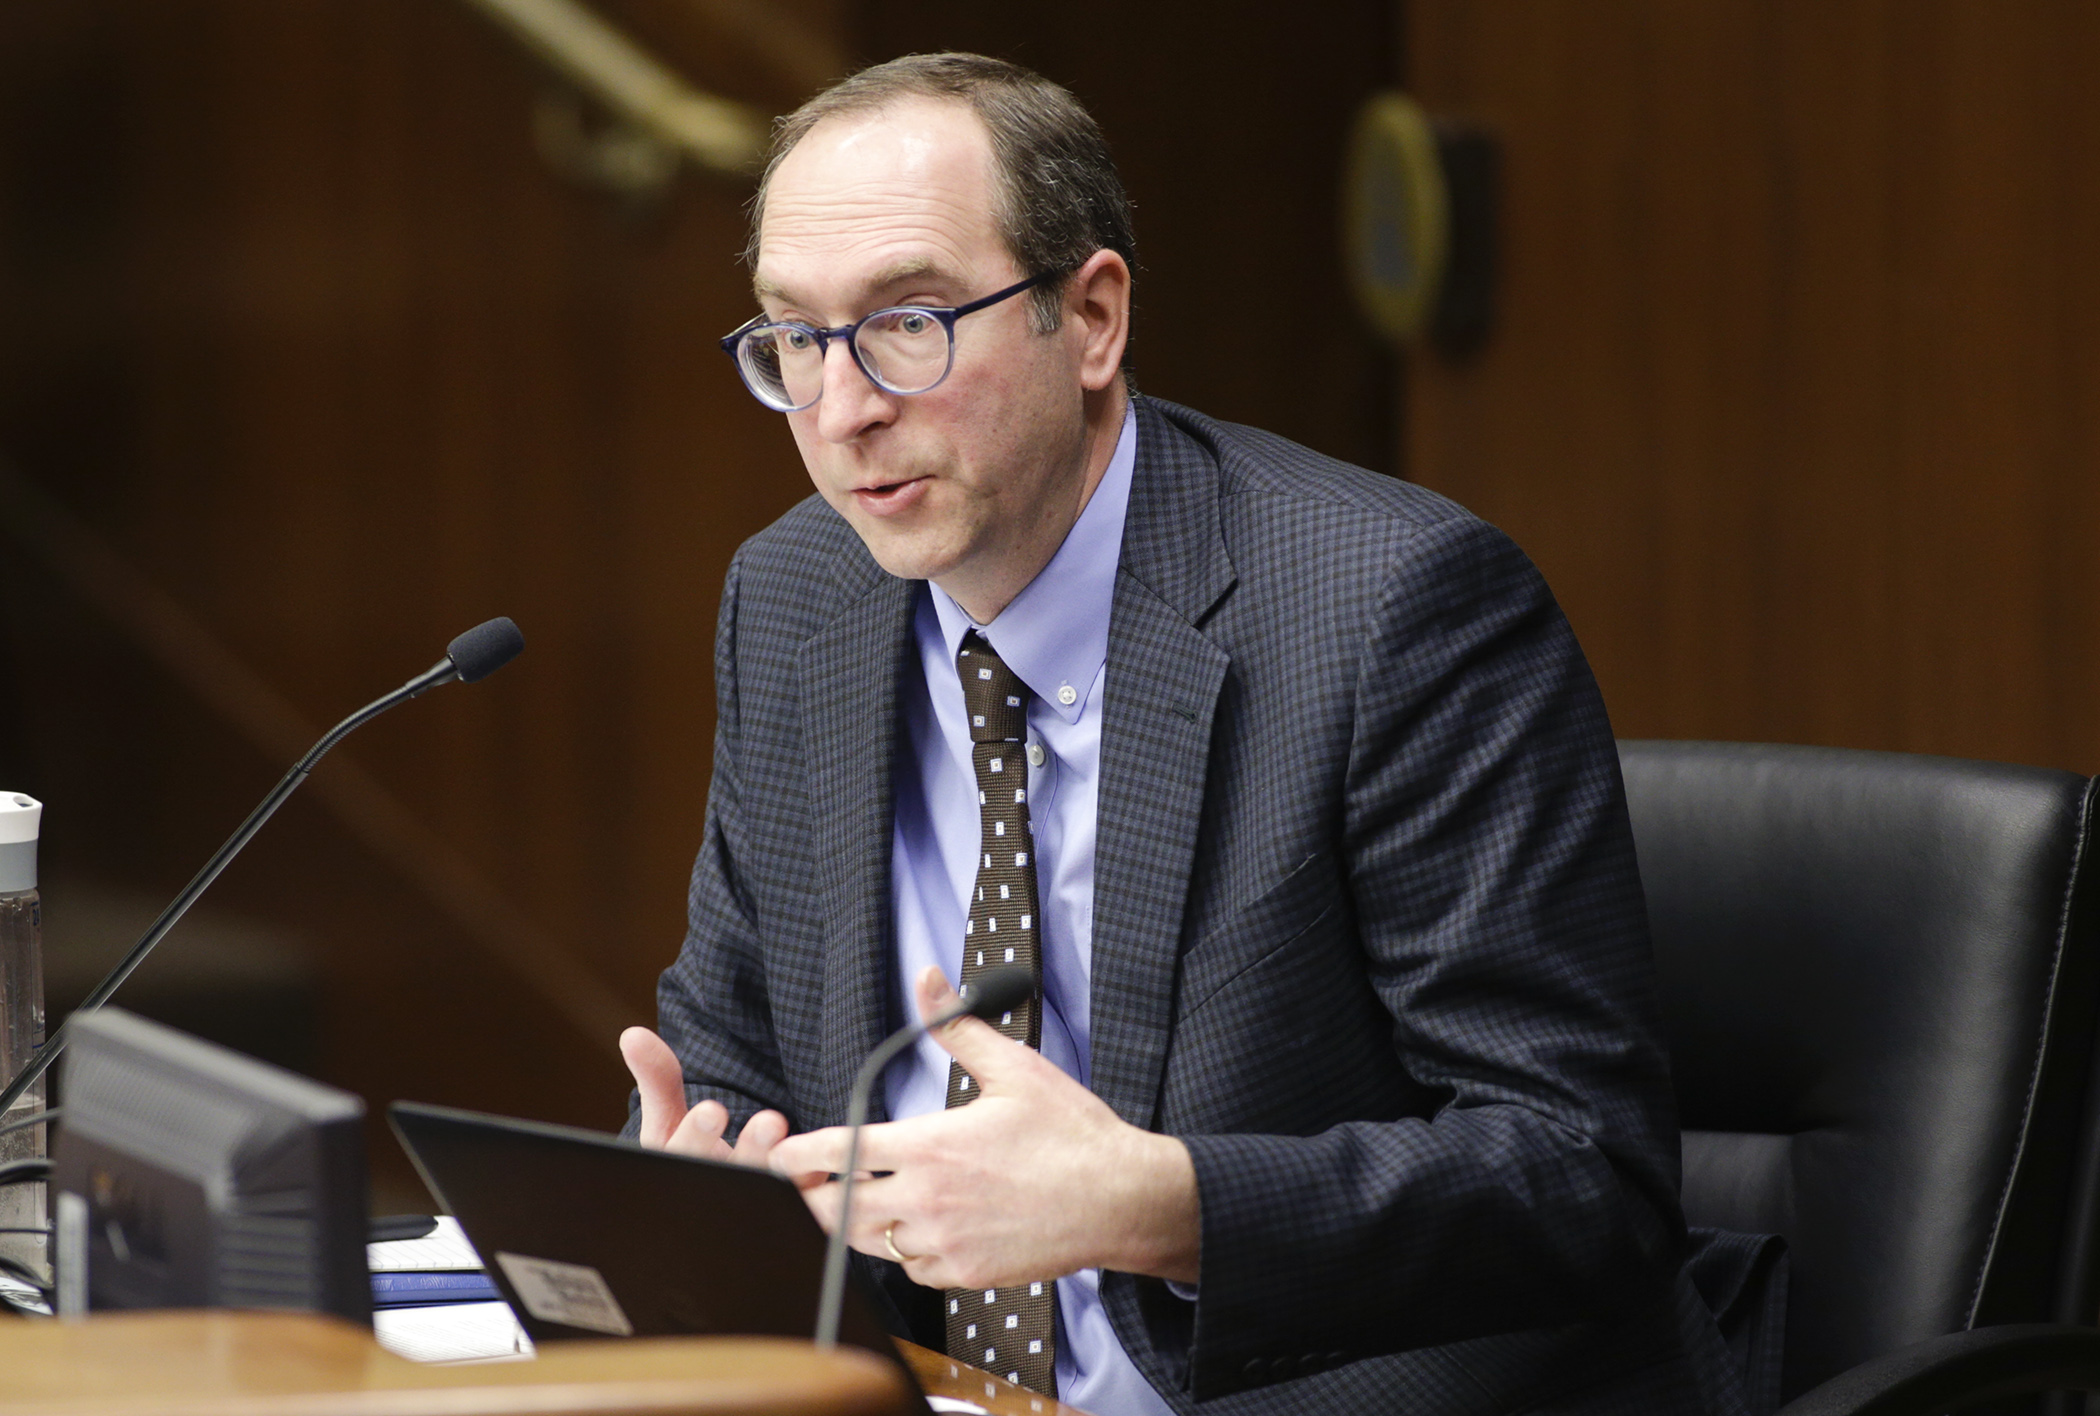 Eric Willette, director of tax research at the Department of Revenue, provides a presentation of the Tax Expenditure Budget to the House Taxes Committee Feb. 25. Photo by Paul Battaglia